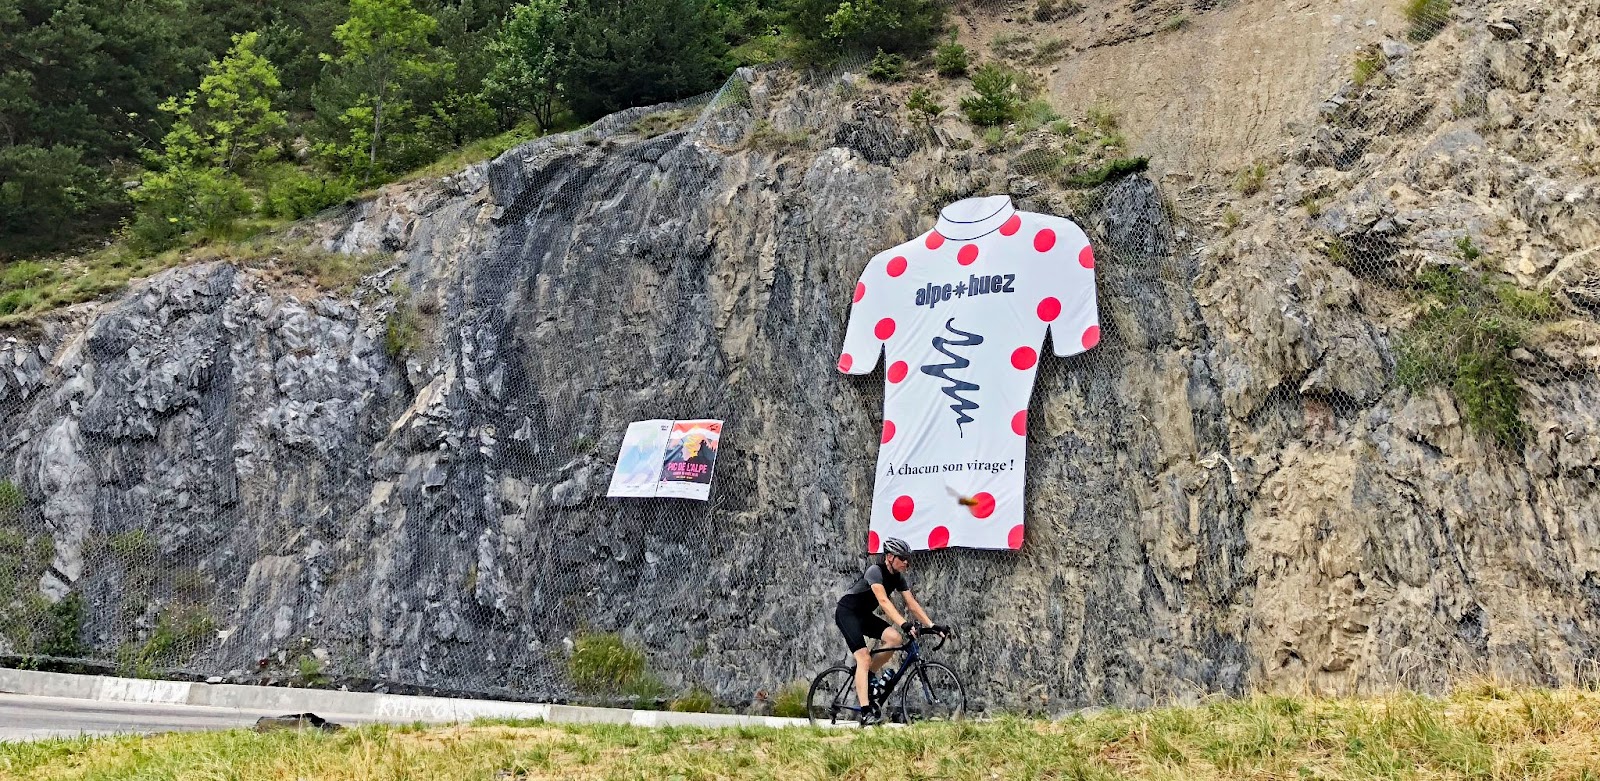 cyclist rides by large polka dot jersey sign on rock wall, Alpe d'Huez